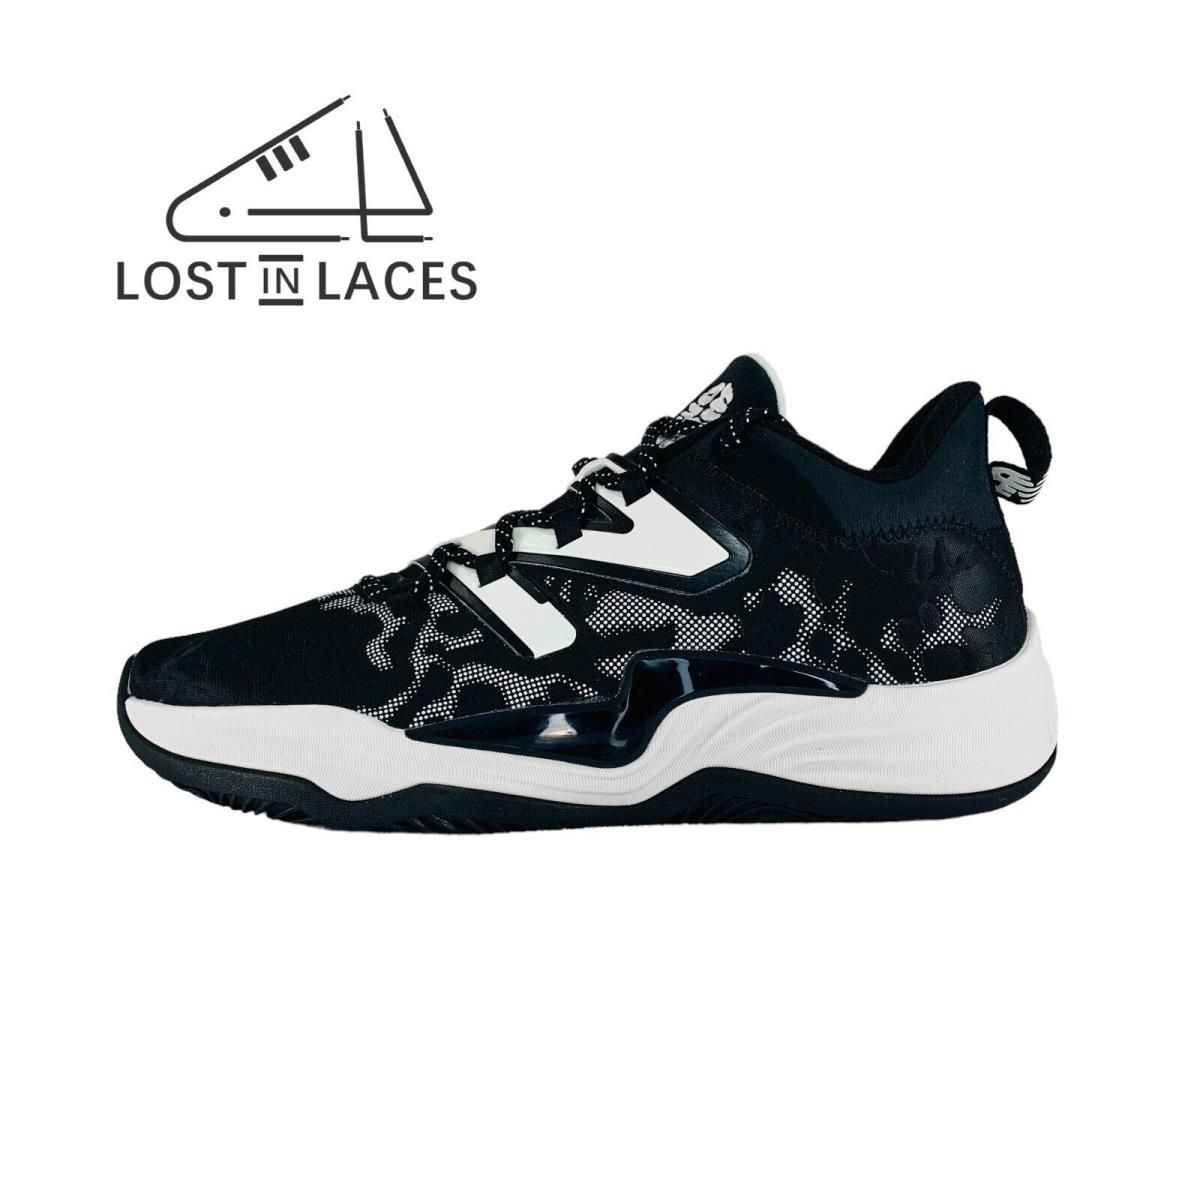 New Balance Two Wxy v3 Sneakers Black White New Men`s Basketball Shoes BB2WYTB3